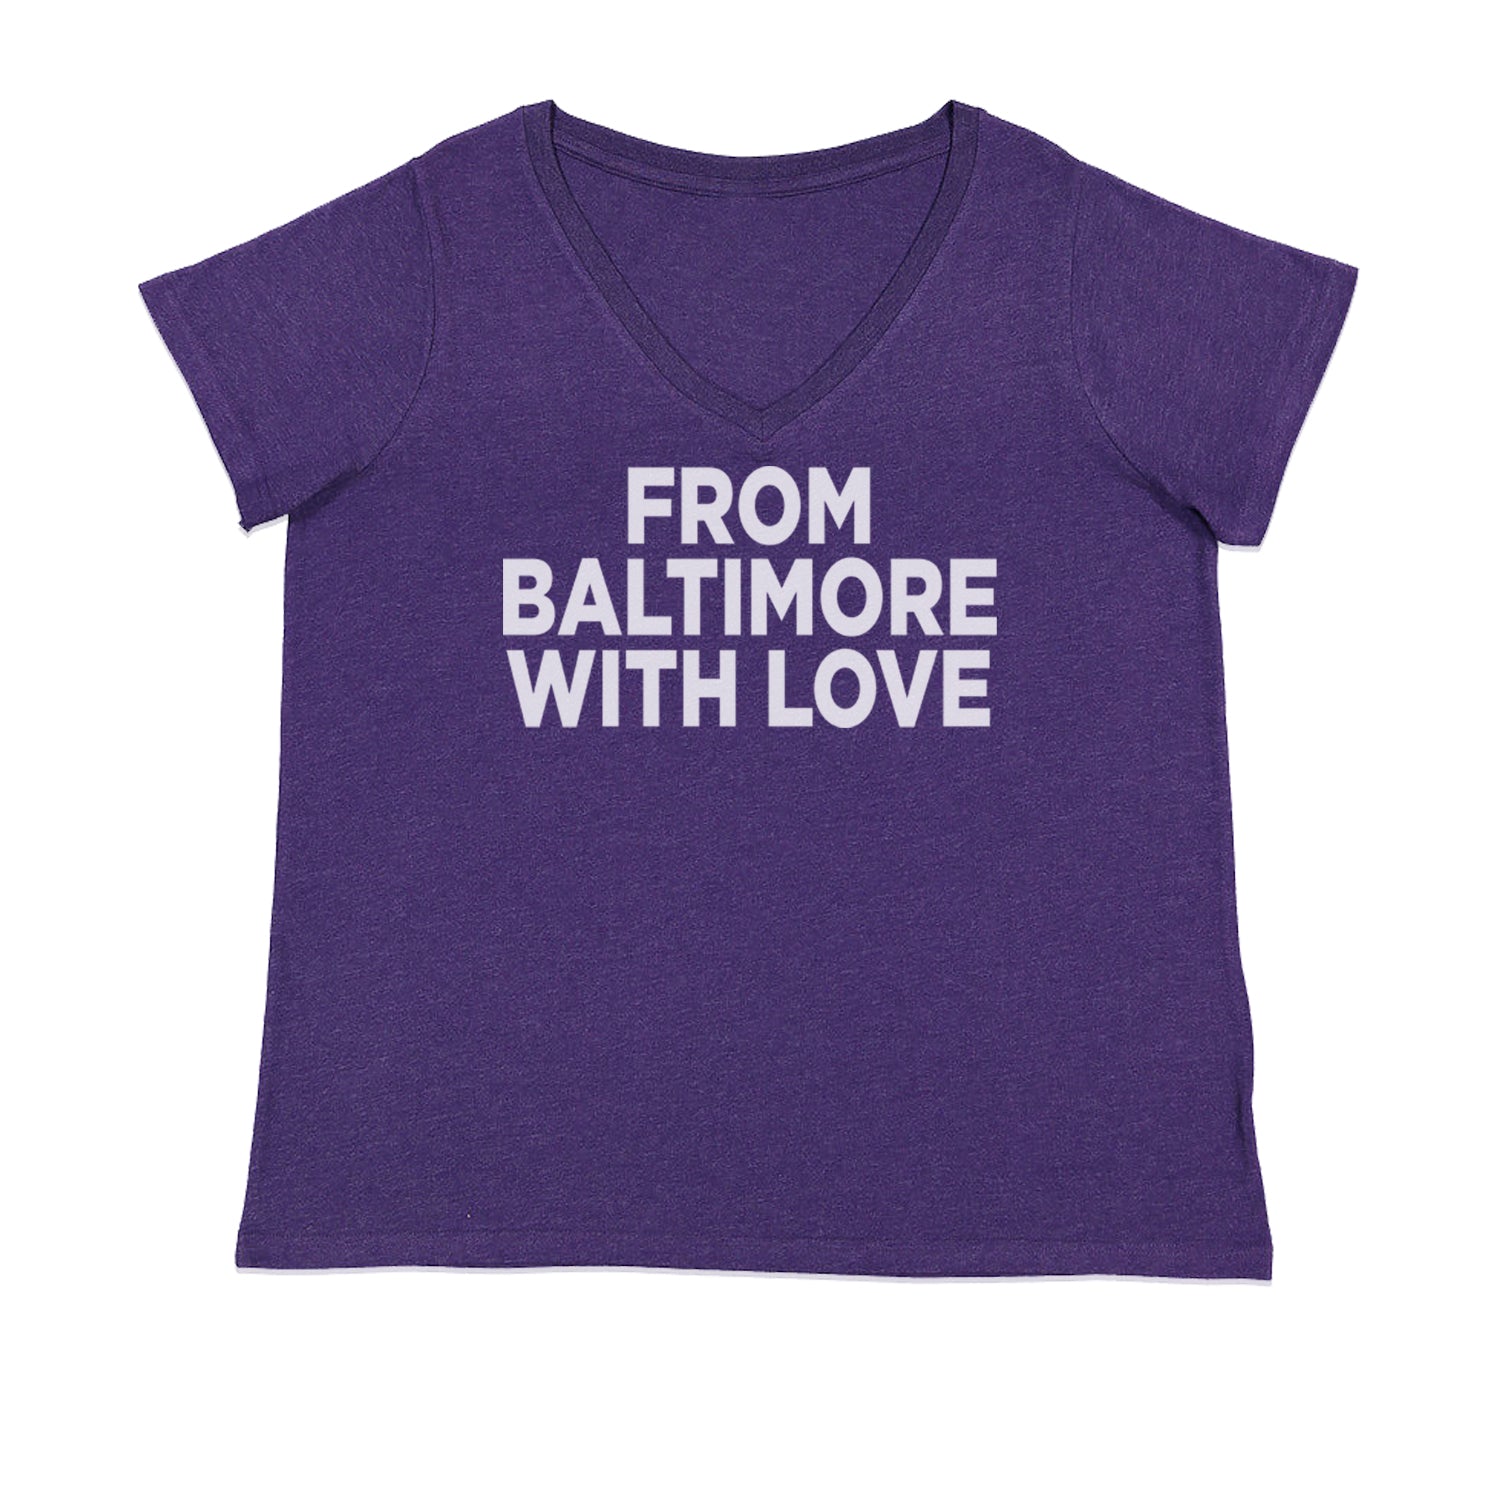 From Baltimore With Love Womens Plus Size V-Neck T-shirt